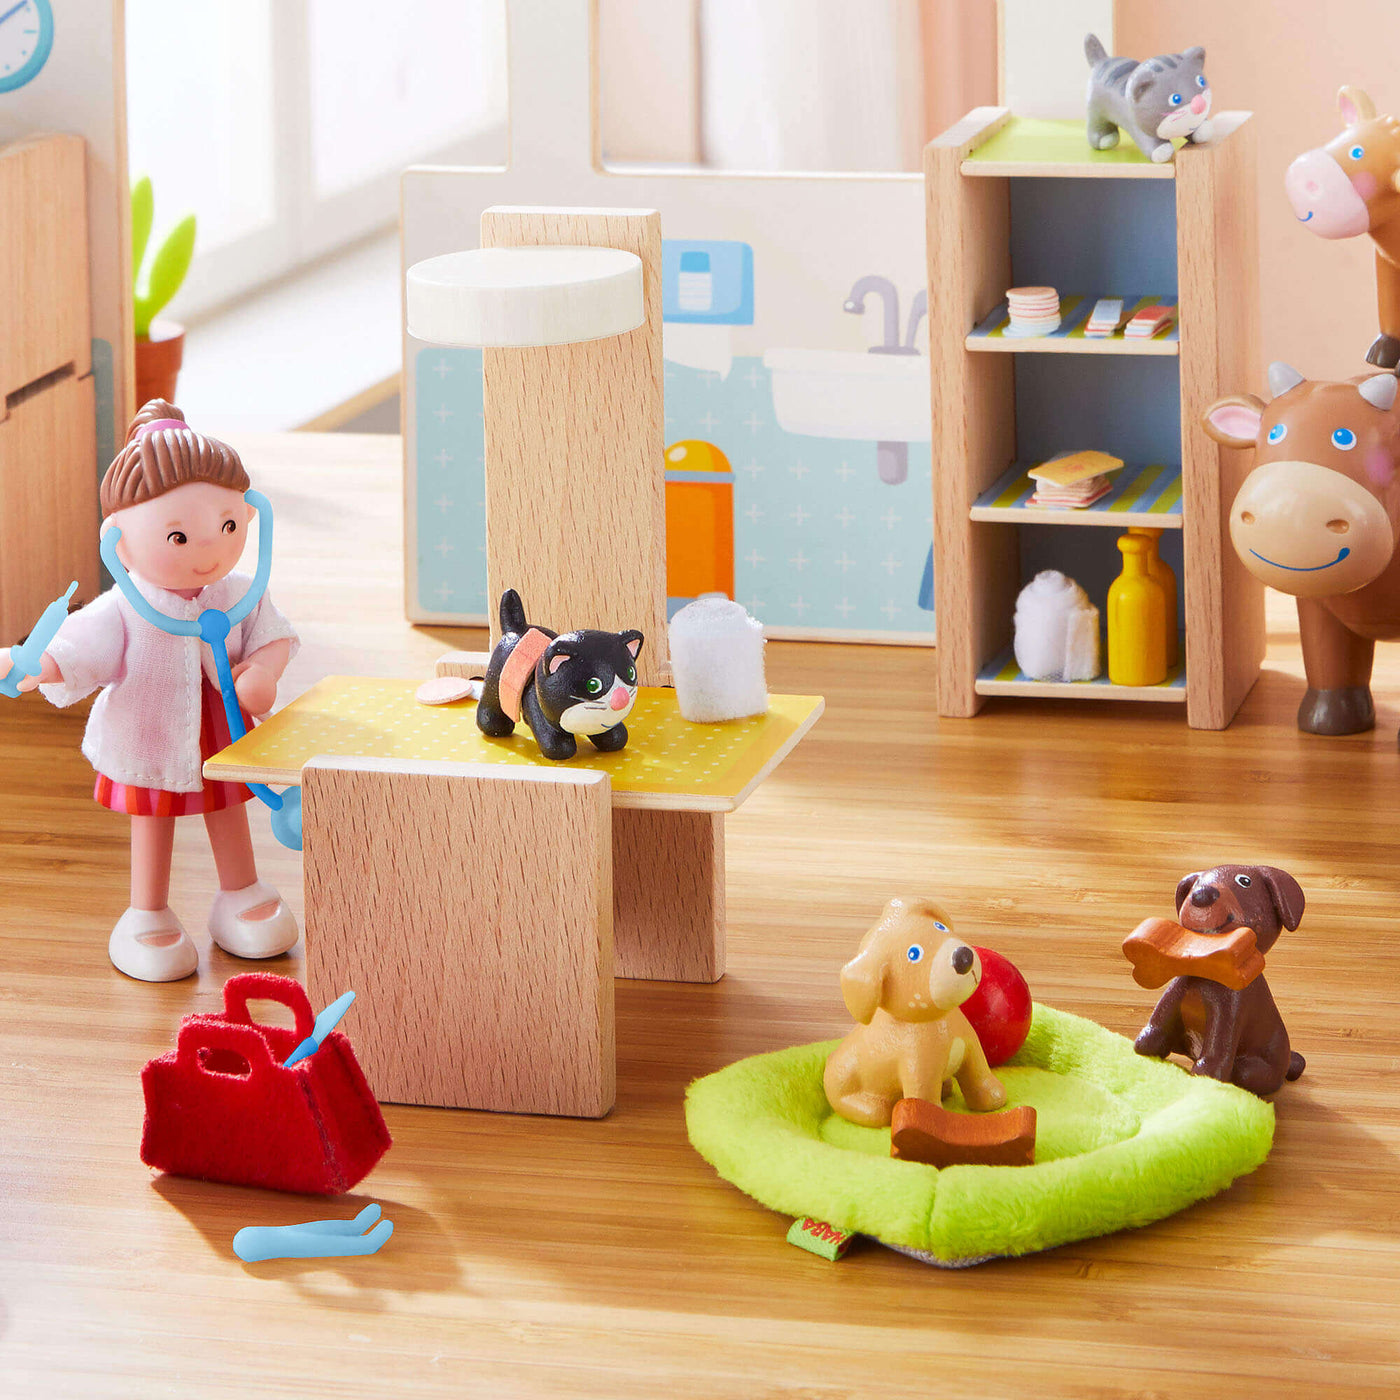 HABA Little Friends Puppy Love Playset at the vet